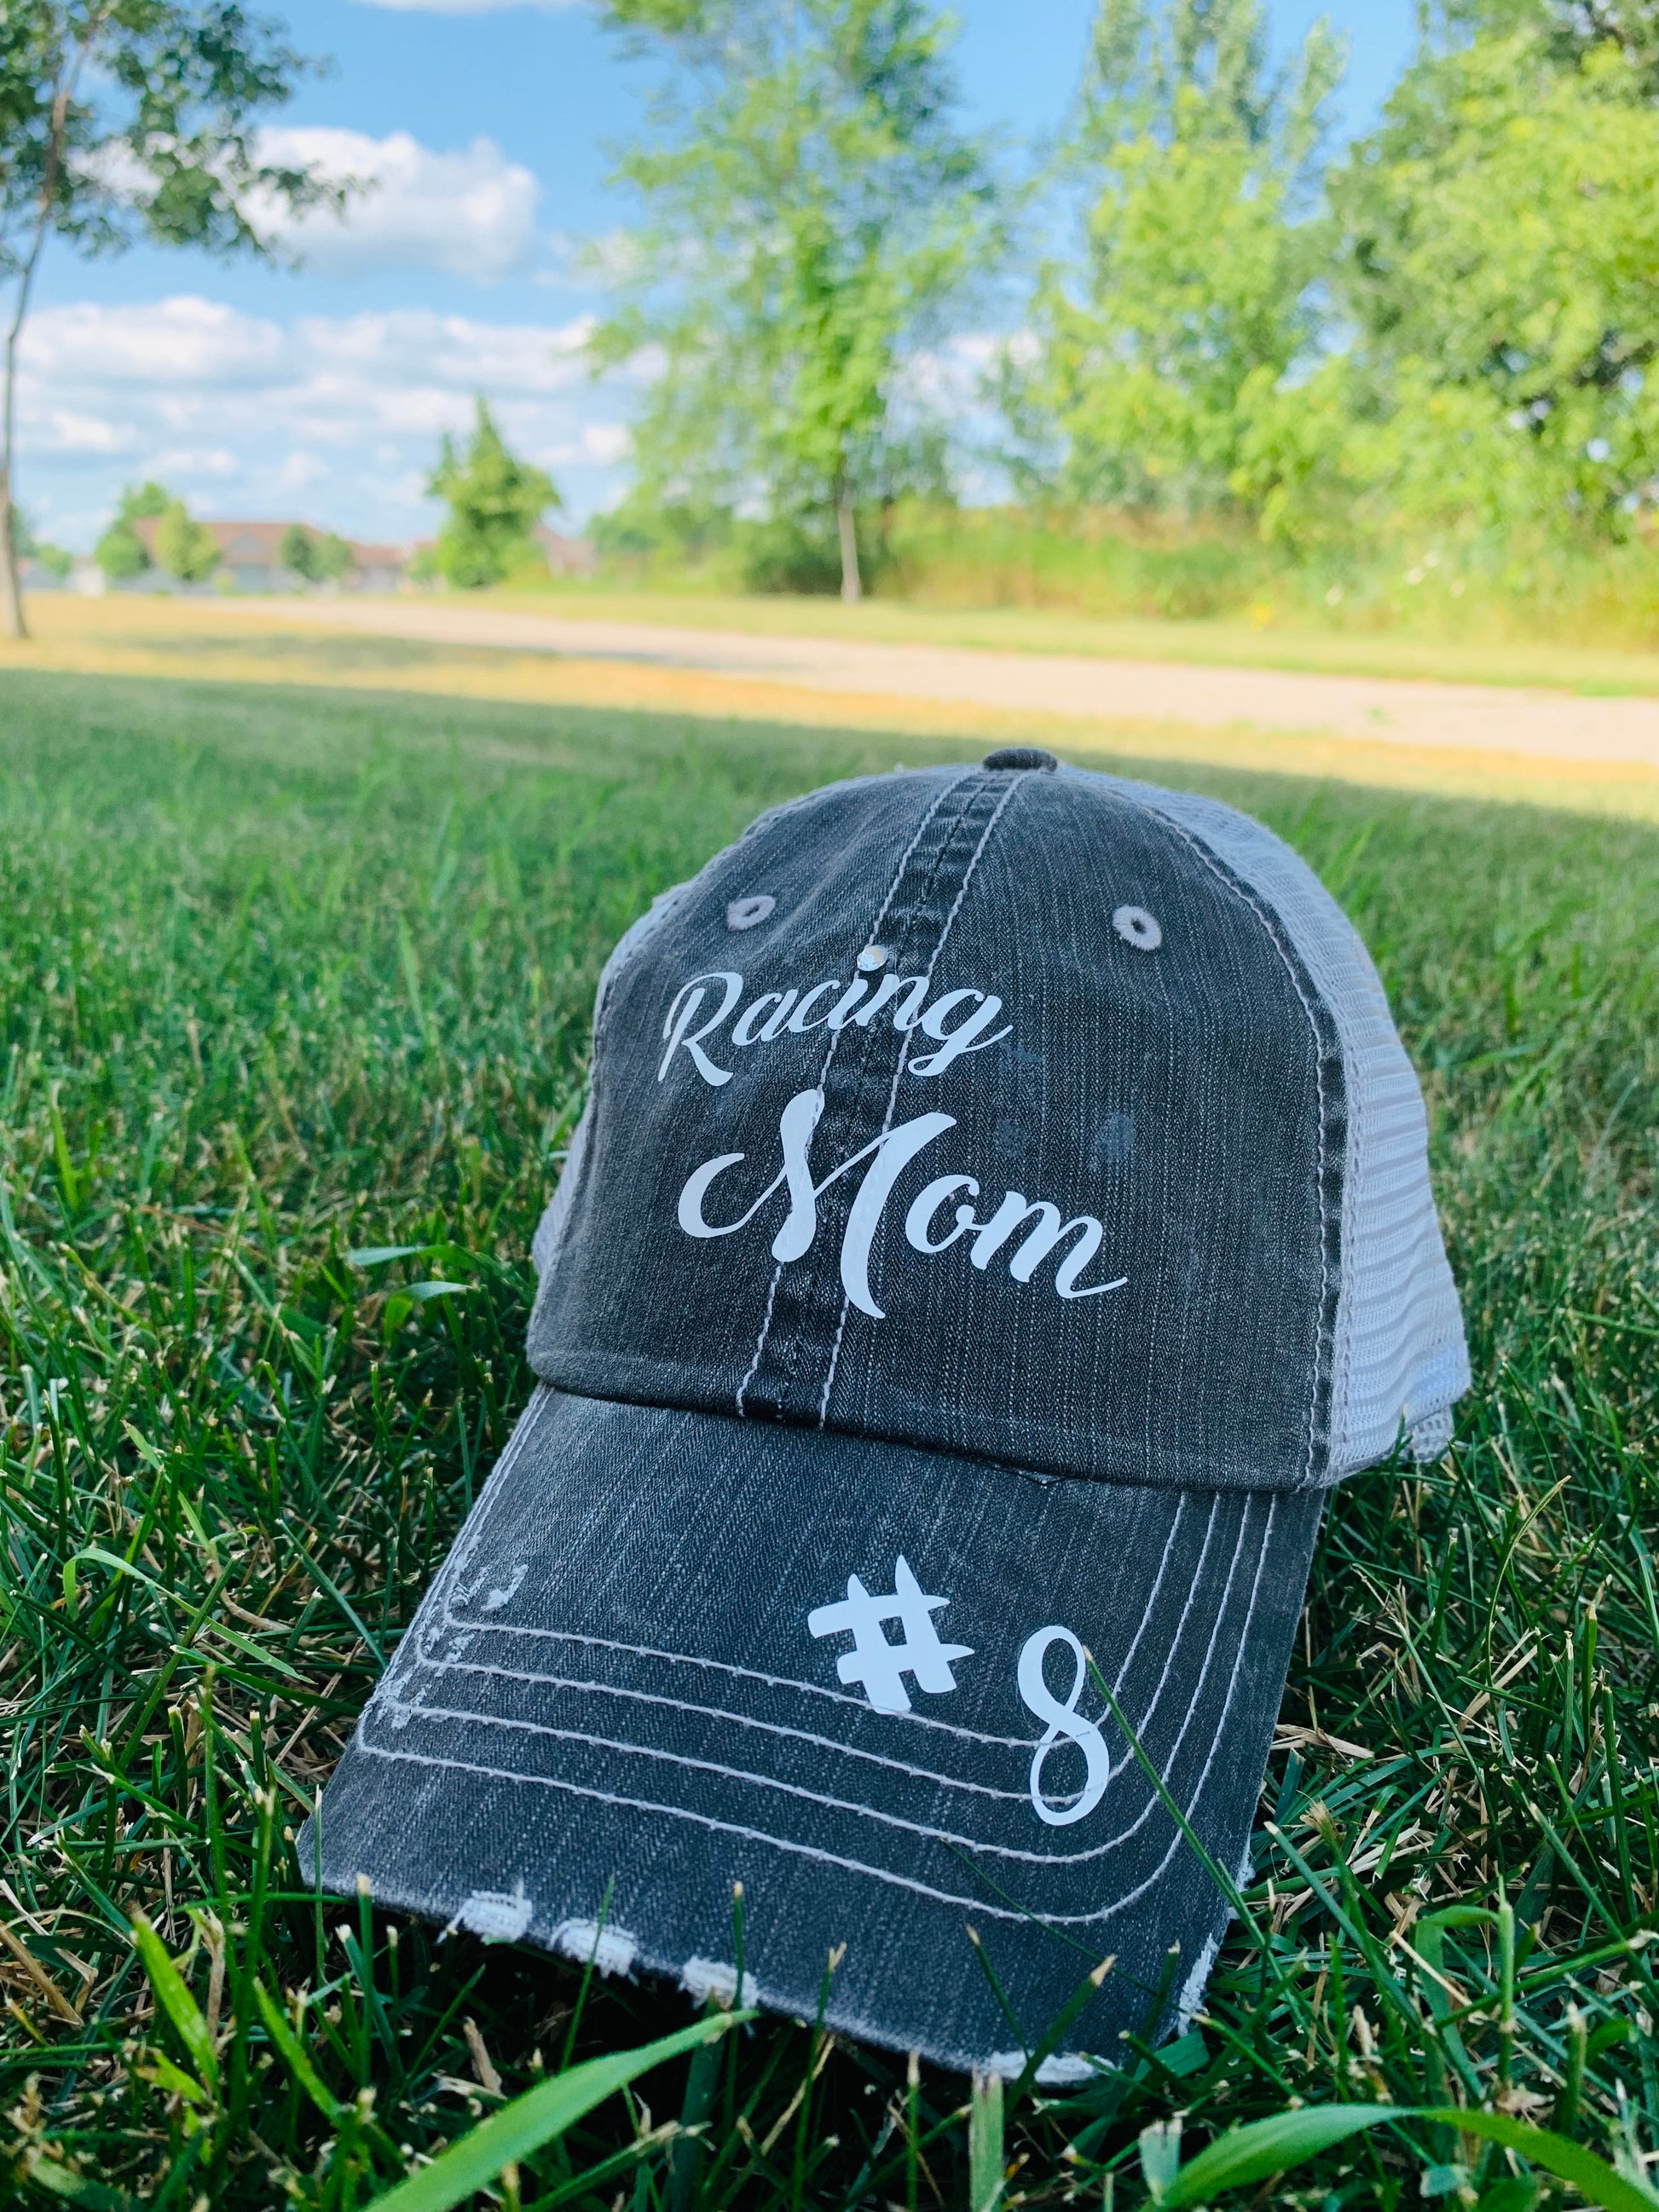 Hats { Racing mom } Customize with names or race numbers. - Stacy's Pink Martini Boutique